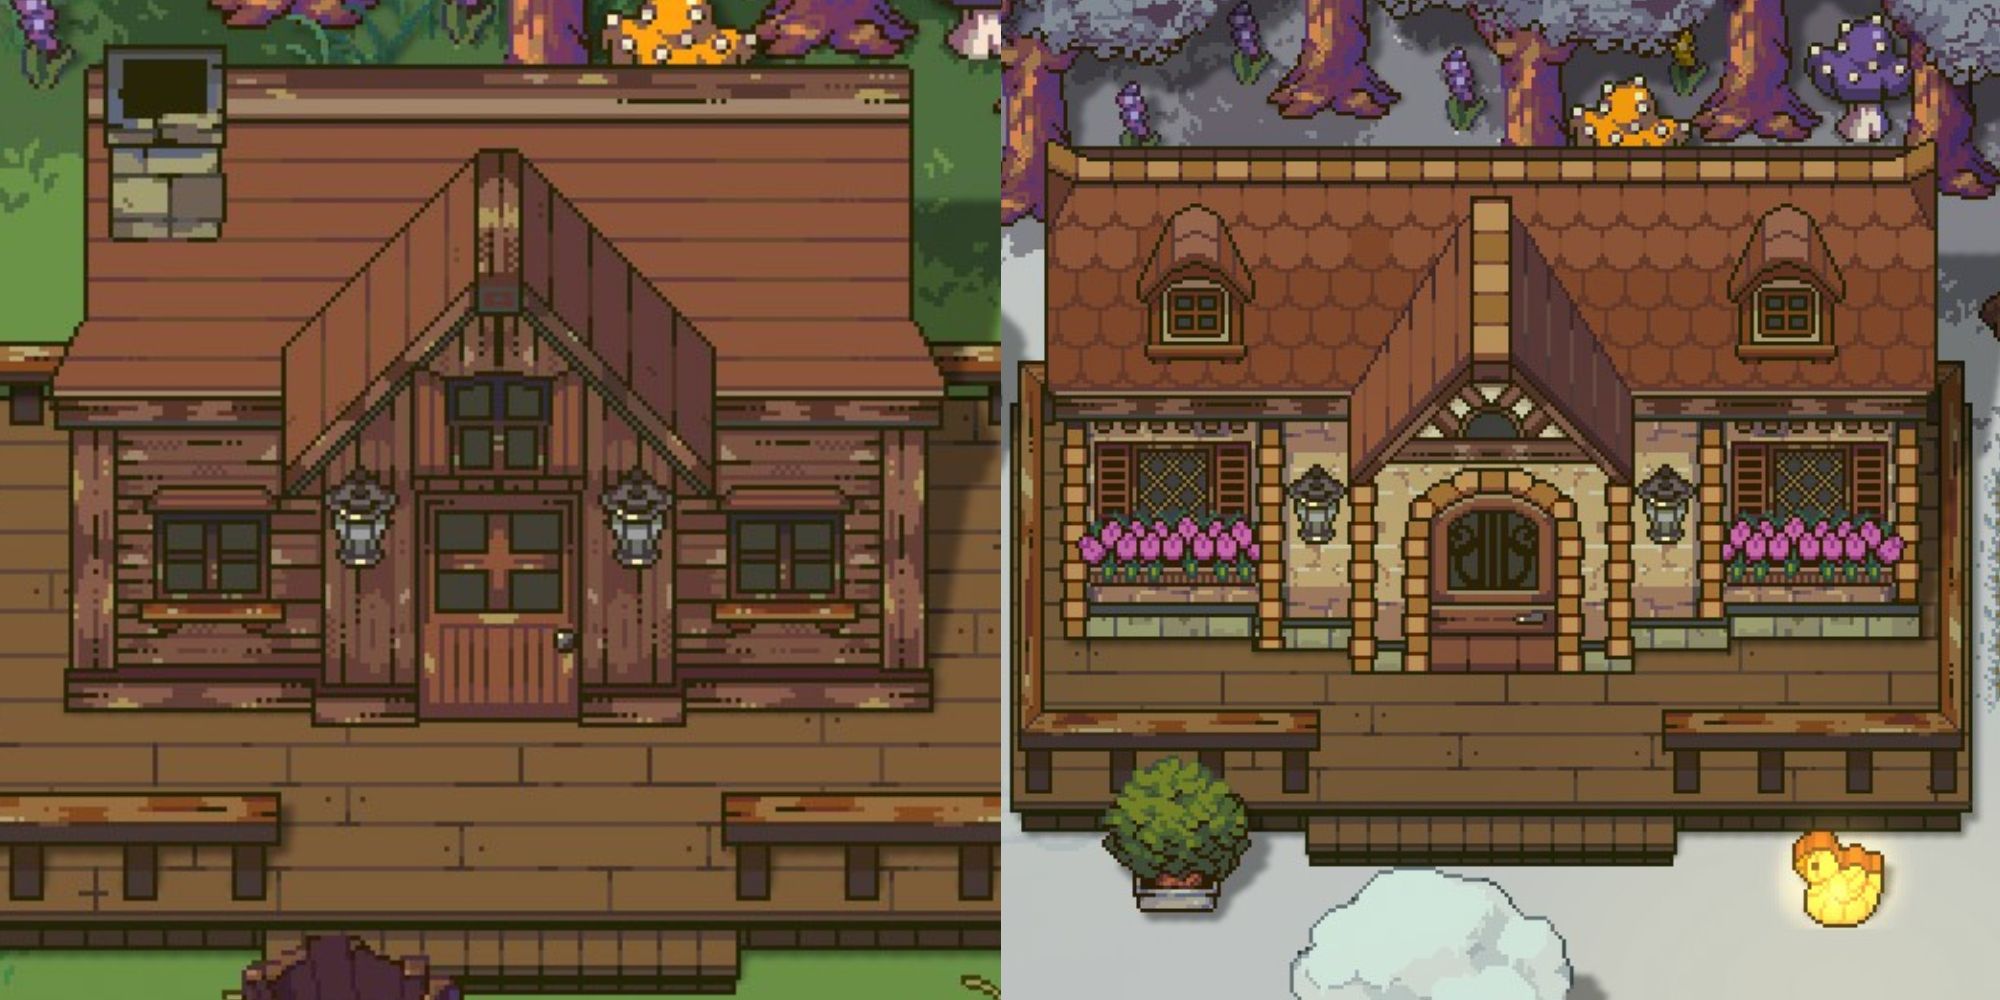 Collage Image of sun haven tier 1 and tier 3 houses.